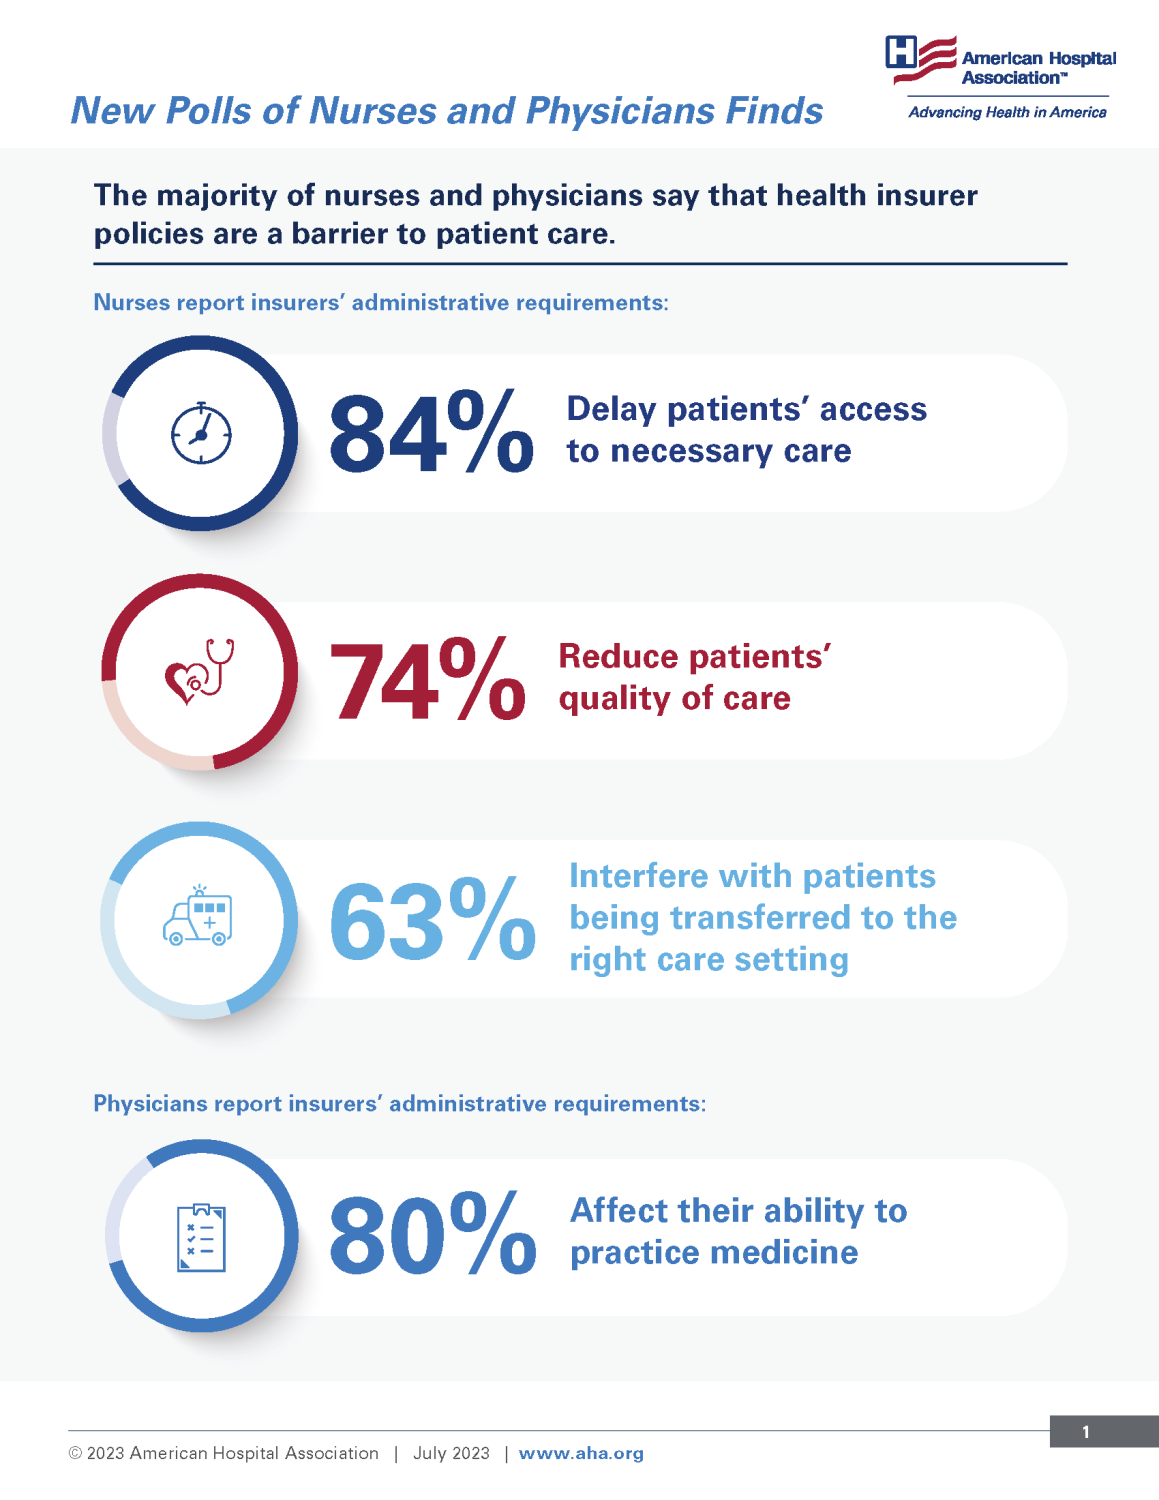 New Polls of Nurses and Physicians Finds Infographic. The Majority of Nurses and Physicians Say That Health Insurer Policies Are a Barrier to Patient Care. Nurses report insurers' administrative requirements: 84%  Delay patients' access to necessary care; 74% Reduce patients' quality of care; 63% Interfere with patients being transferred to the right care setting. Physicians report insurers' administrative requirements: 80% Affect their ability to practice medicine.